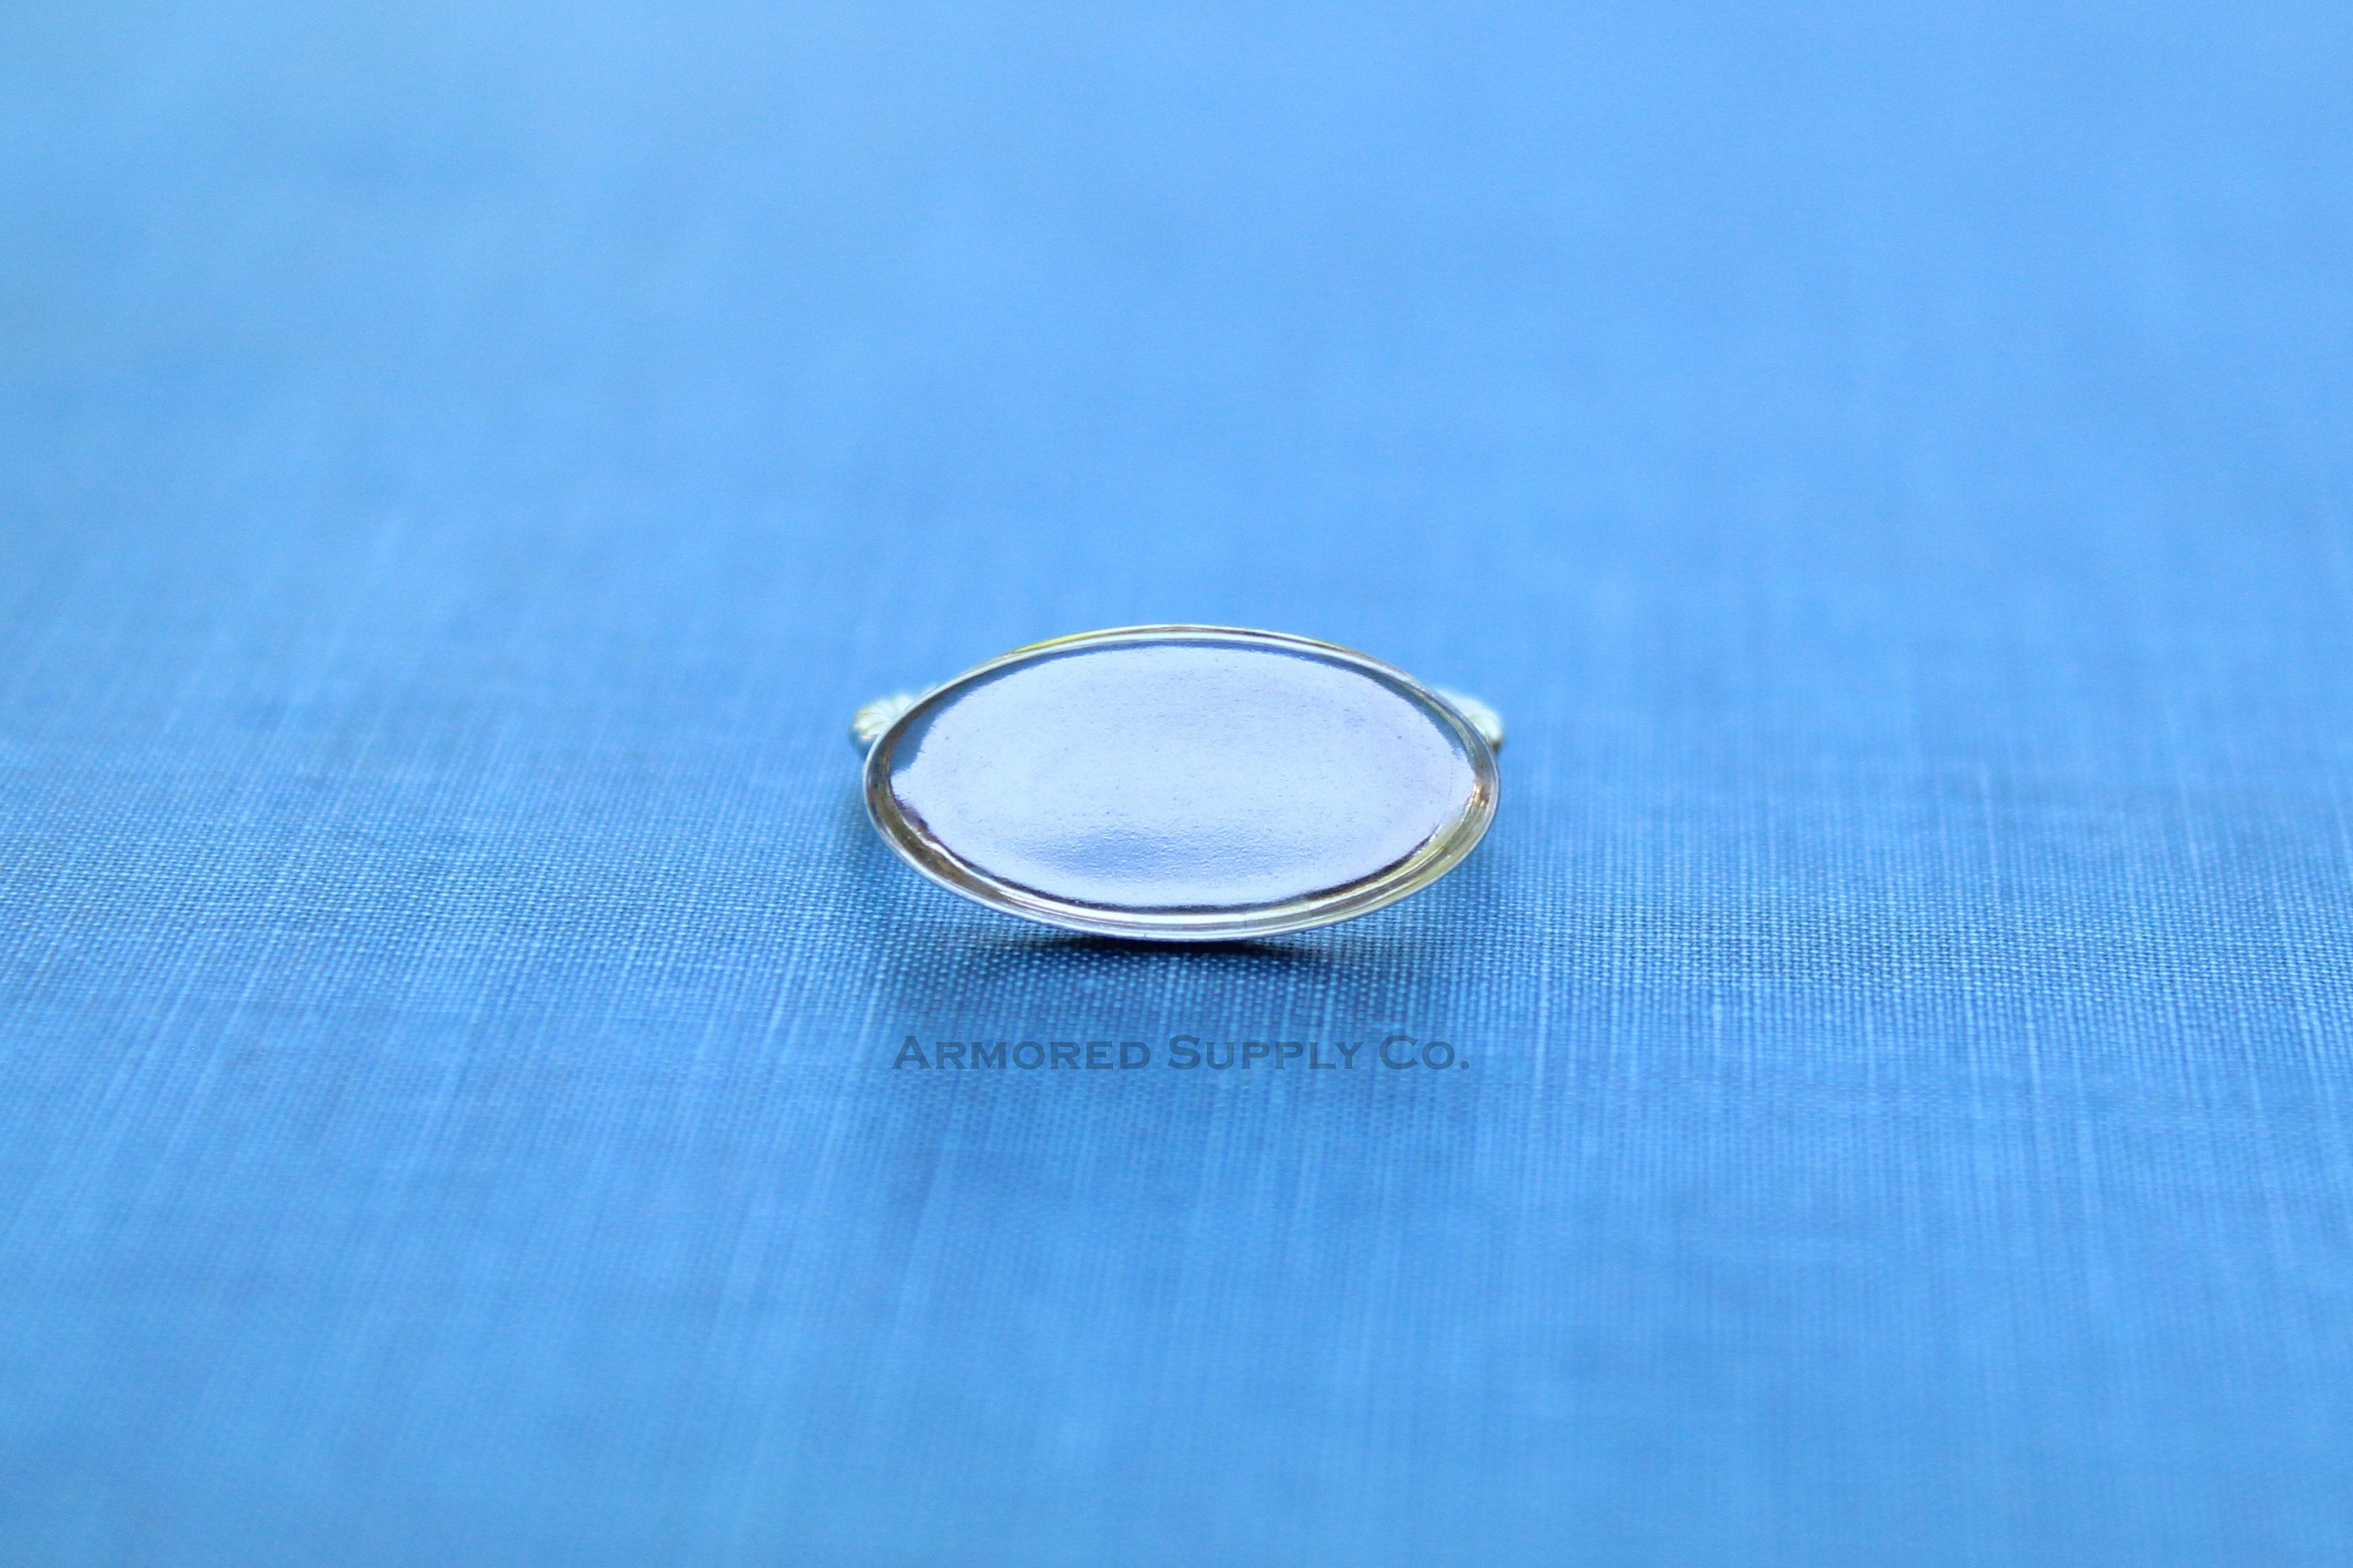 20x7mm Oval Bezel Cup Rope Ring blank, Oval Cabochon, Cab Resin, Breast Milk, DIY jewelry supplies, build your ring, wholesale jewelry, diy